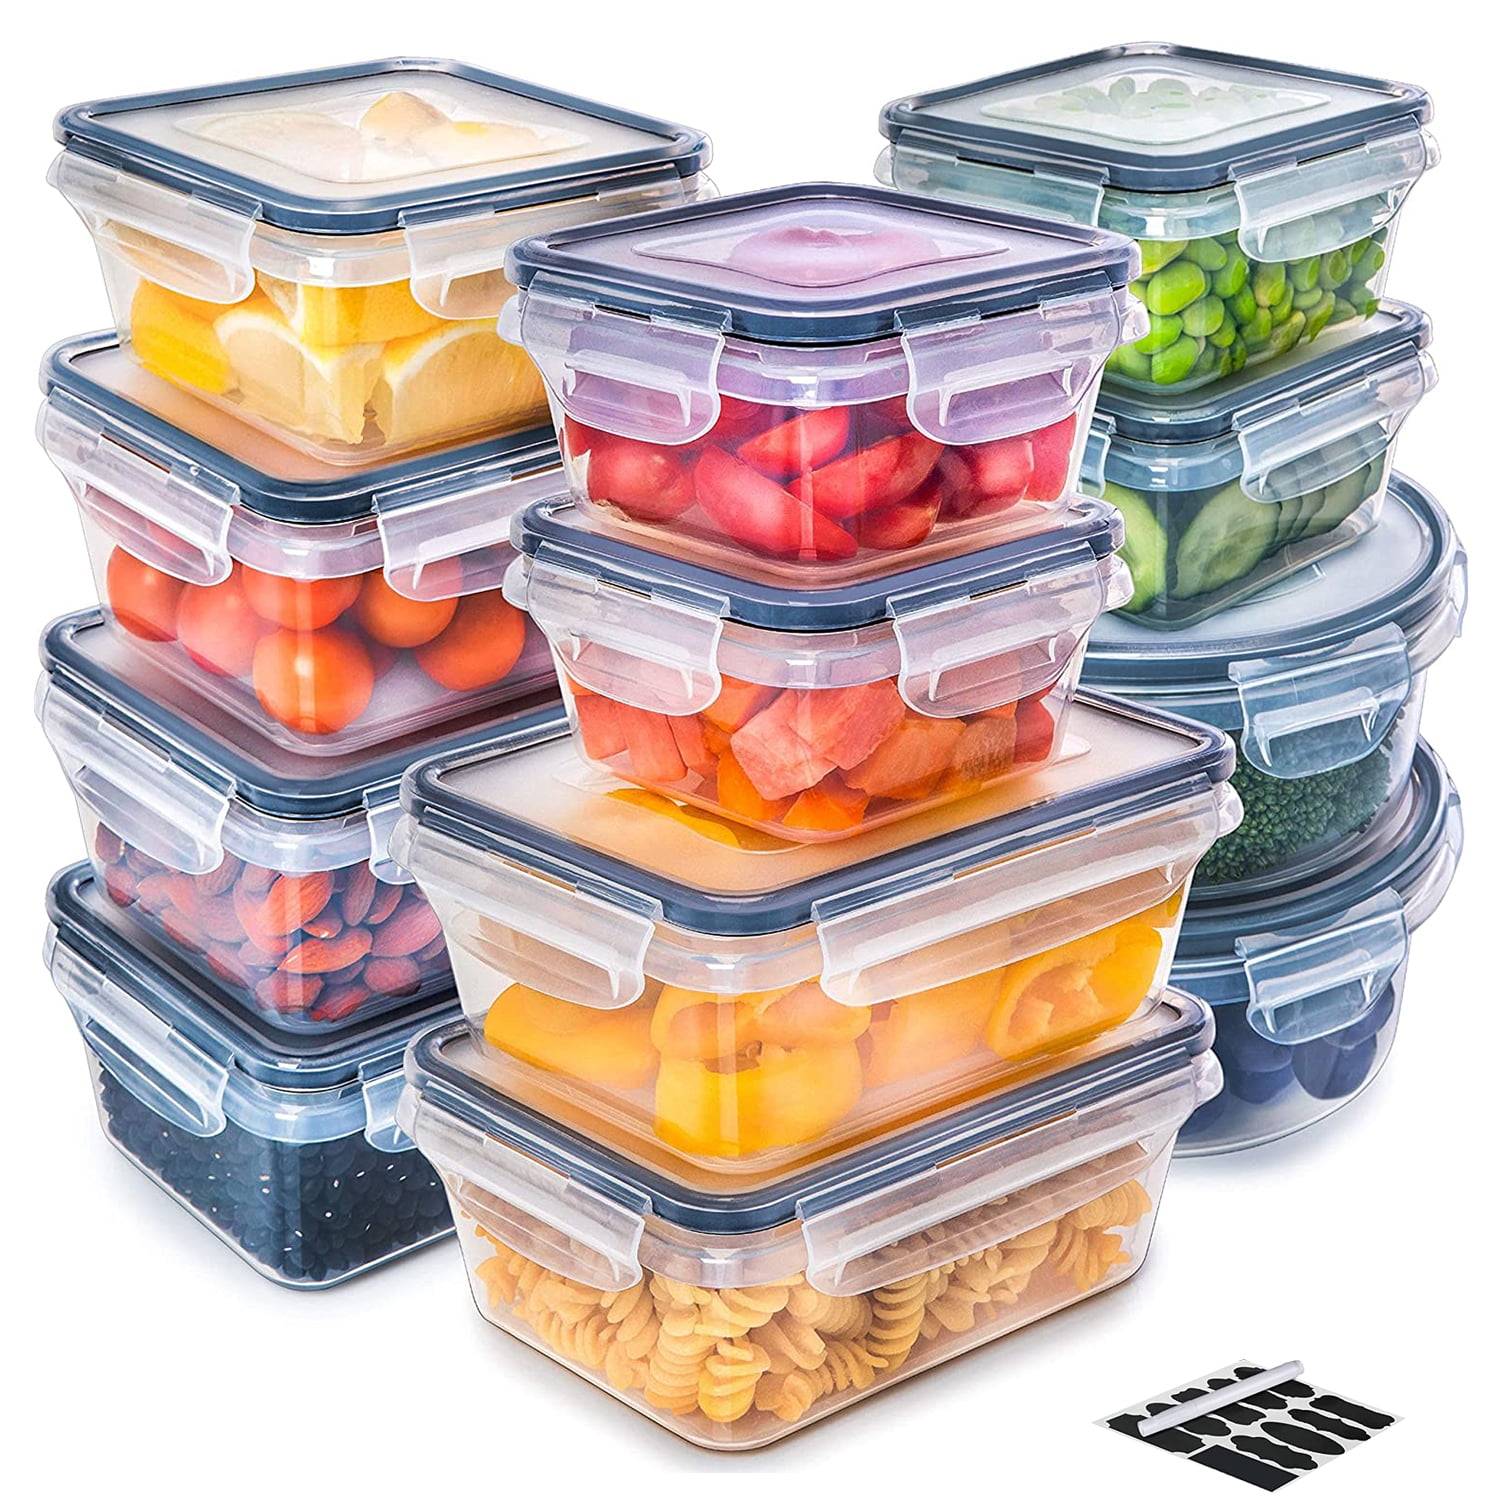 Prep Naturals - Food Storage Containers - Disposable Meal Prep Containers -  Plastic Food Containers with Lids - 60 Packs, 24 Ounces